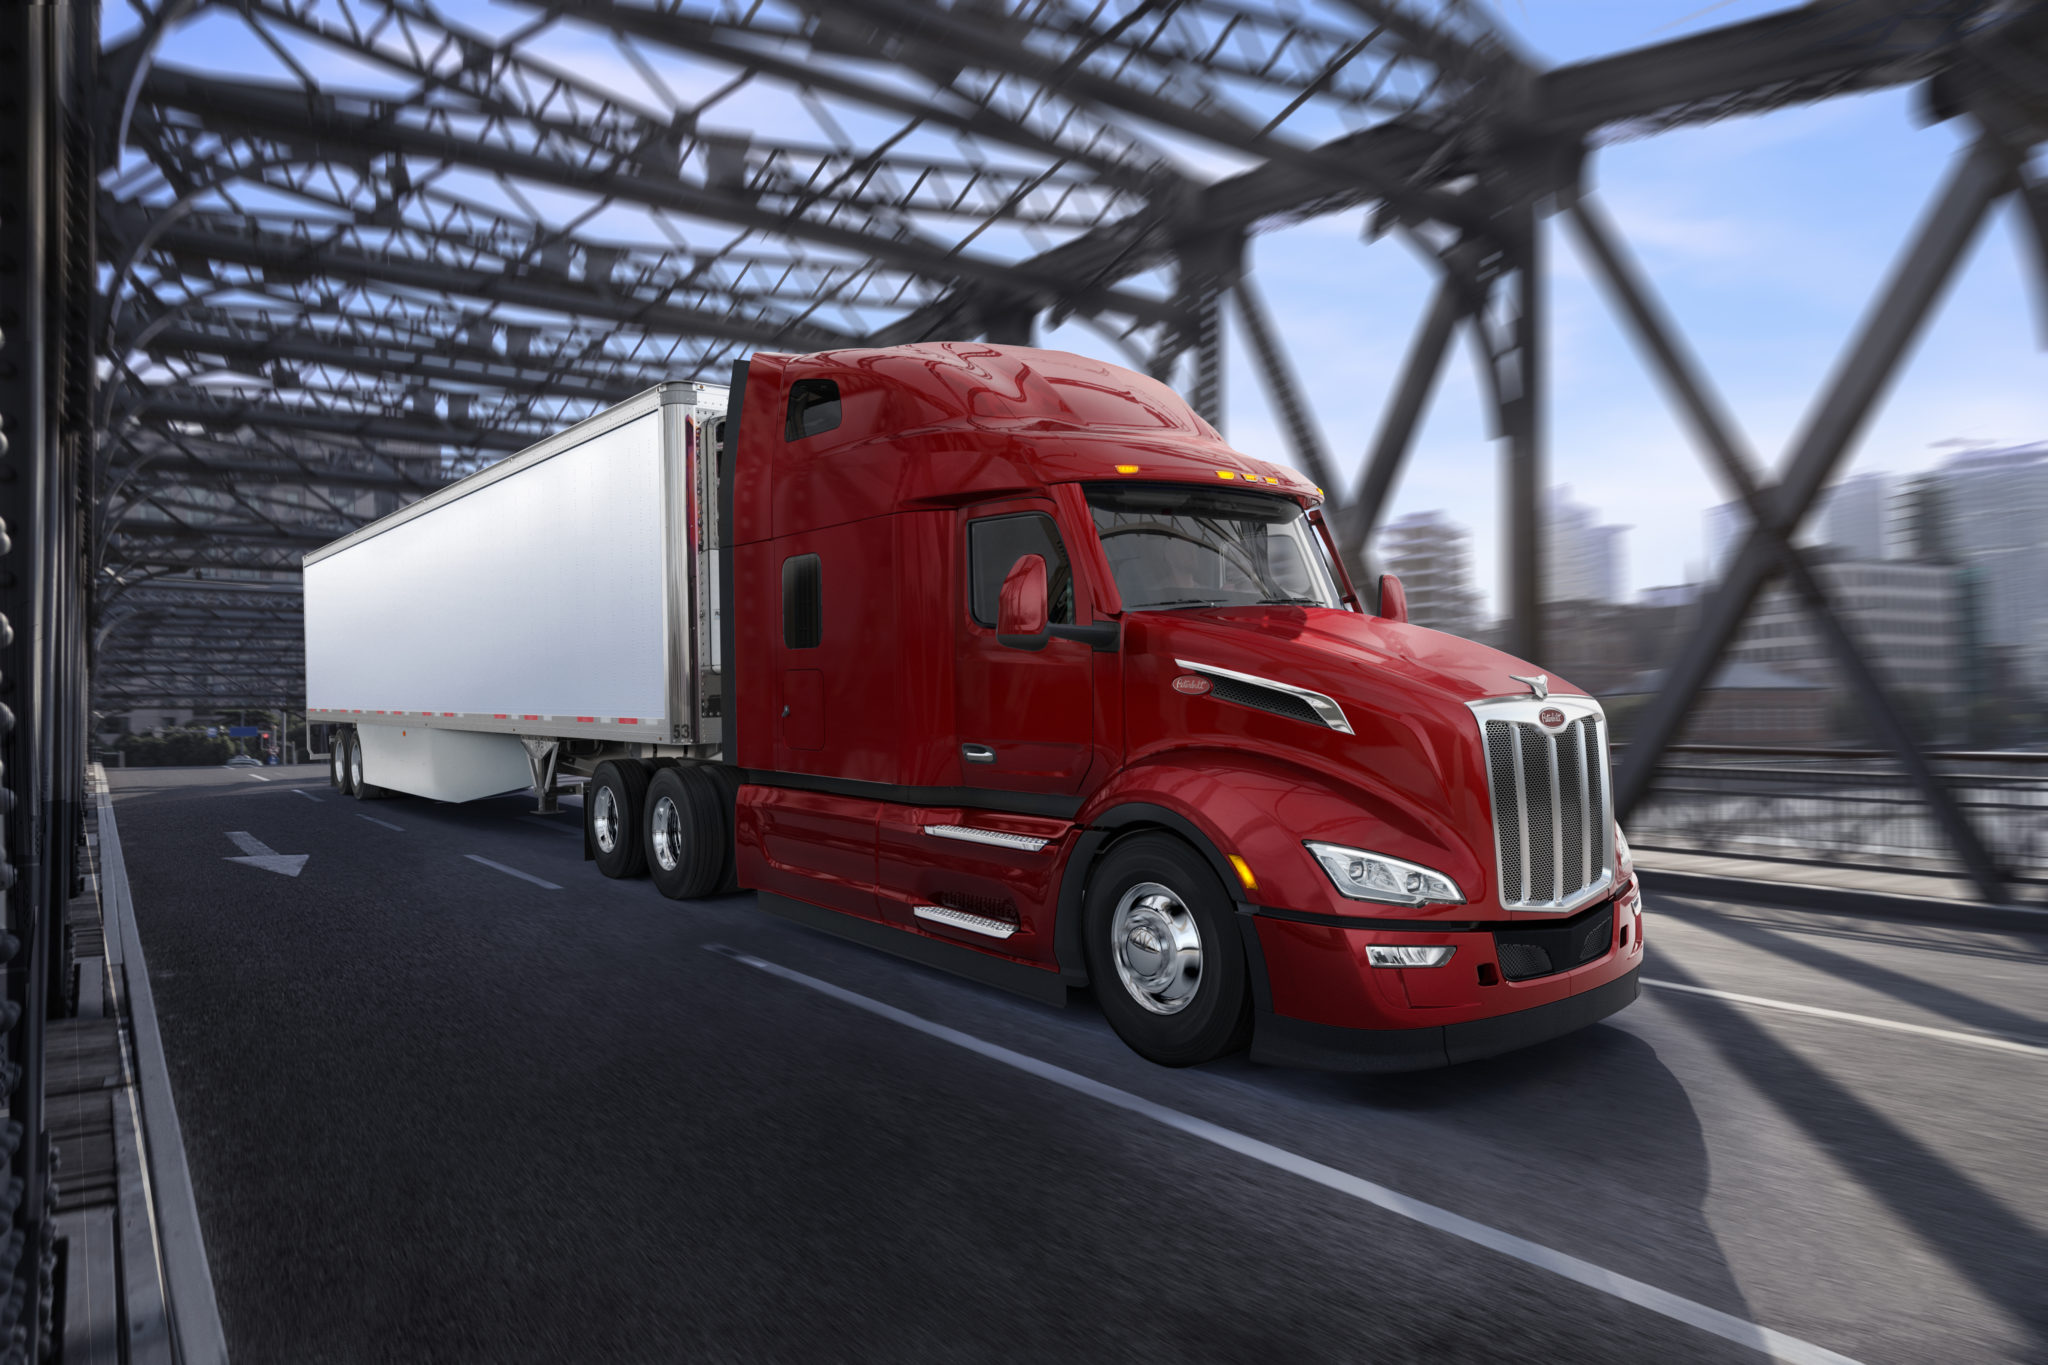 Redesigned Model 579 is 'the most reliable truck ever designed by